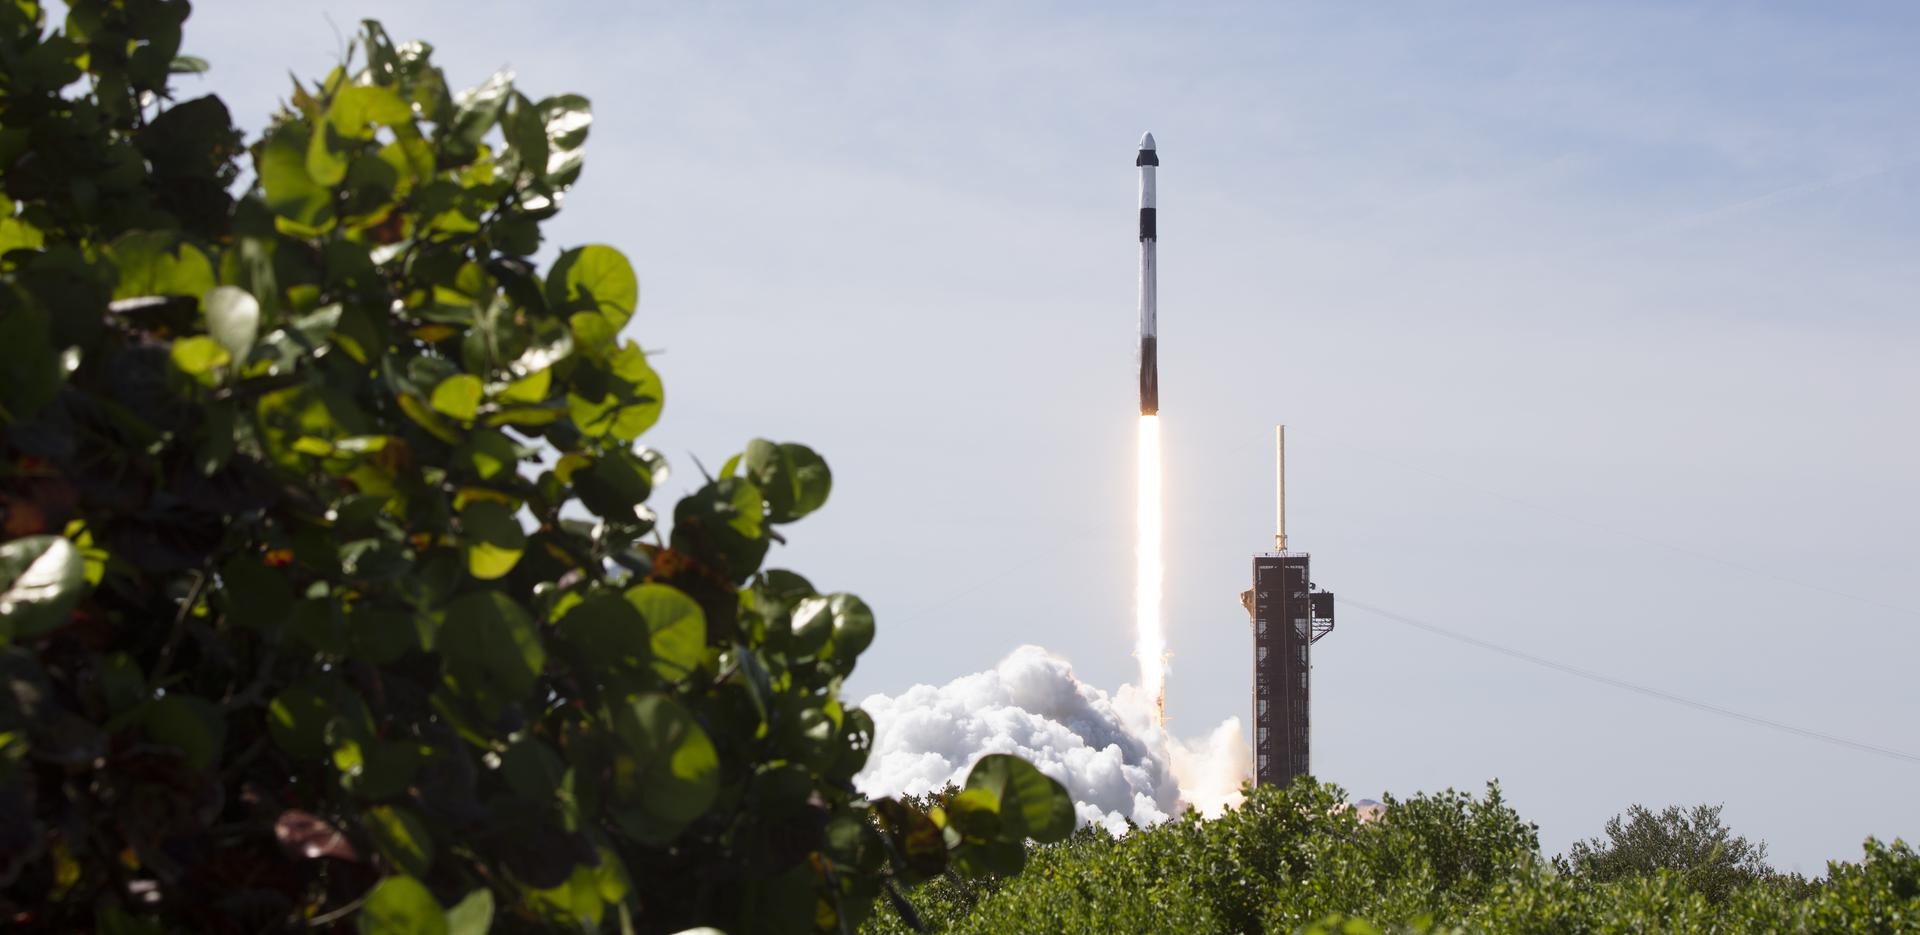 A SpaceX Falcon 9 rocket carrying the company's Crew Dragon spacecraft launches from Kennedy Space Center in 2022. Credit: NASA.